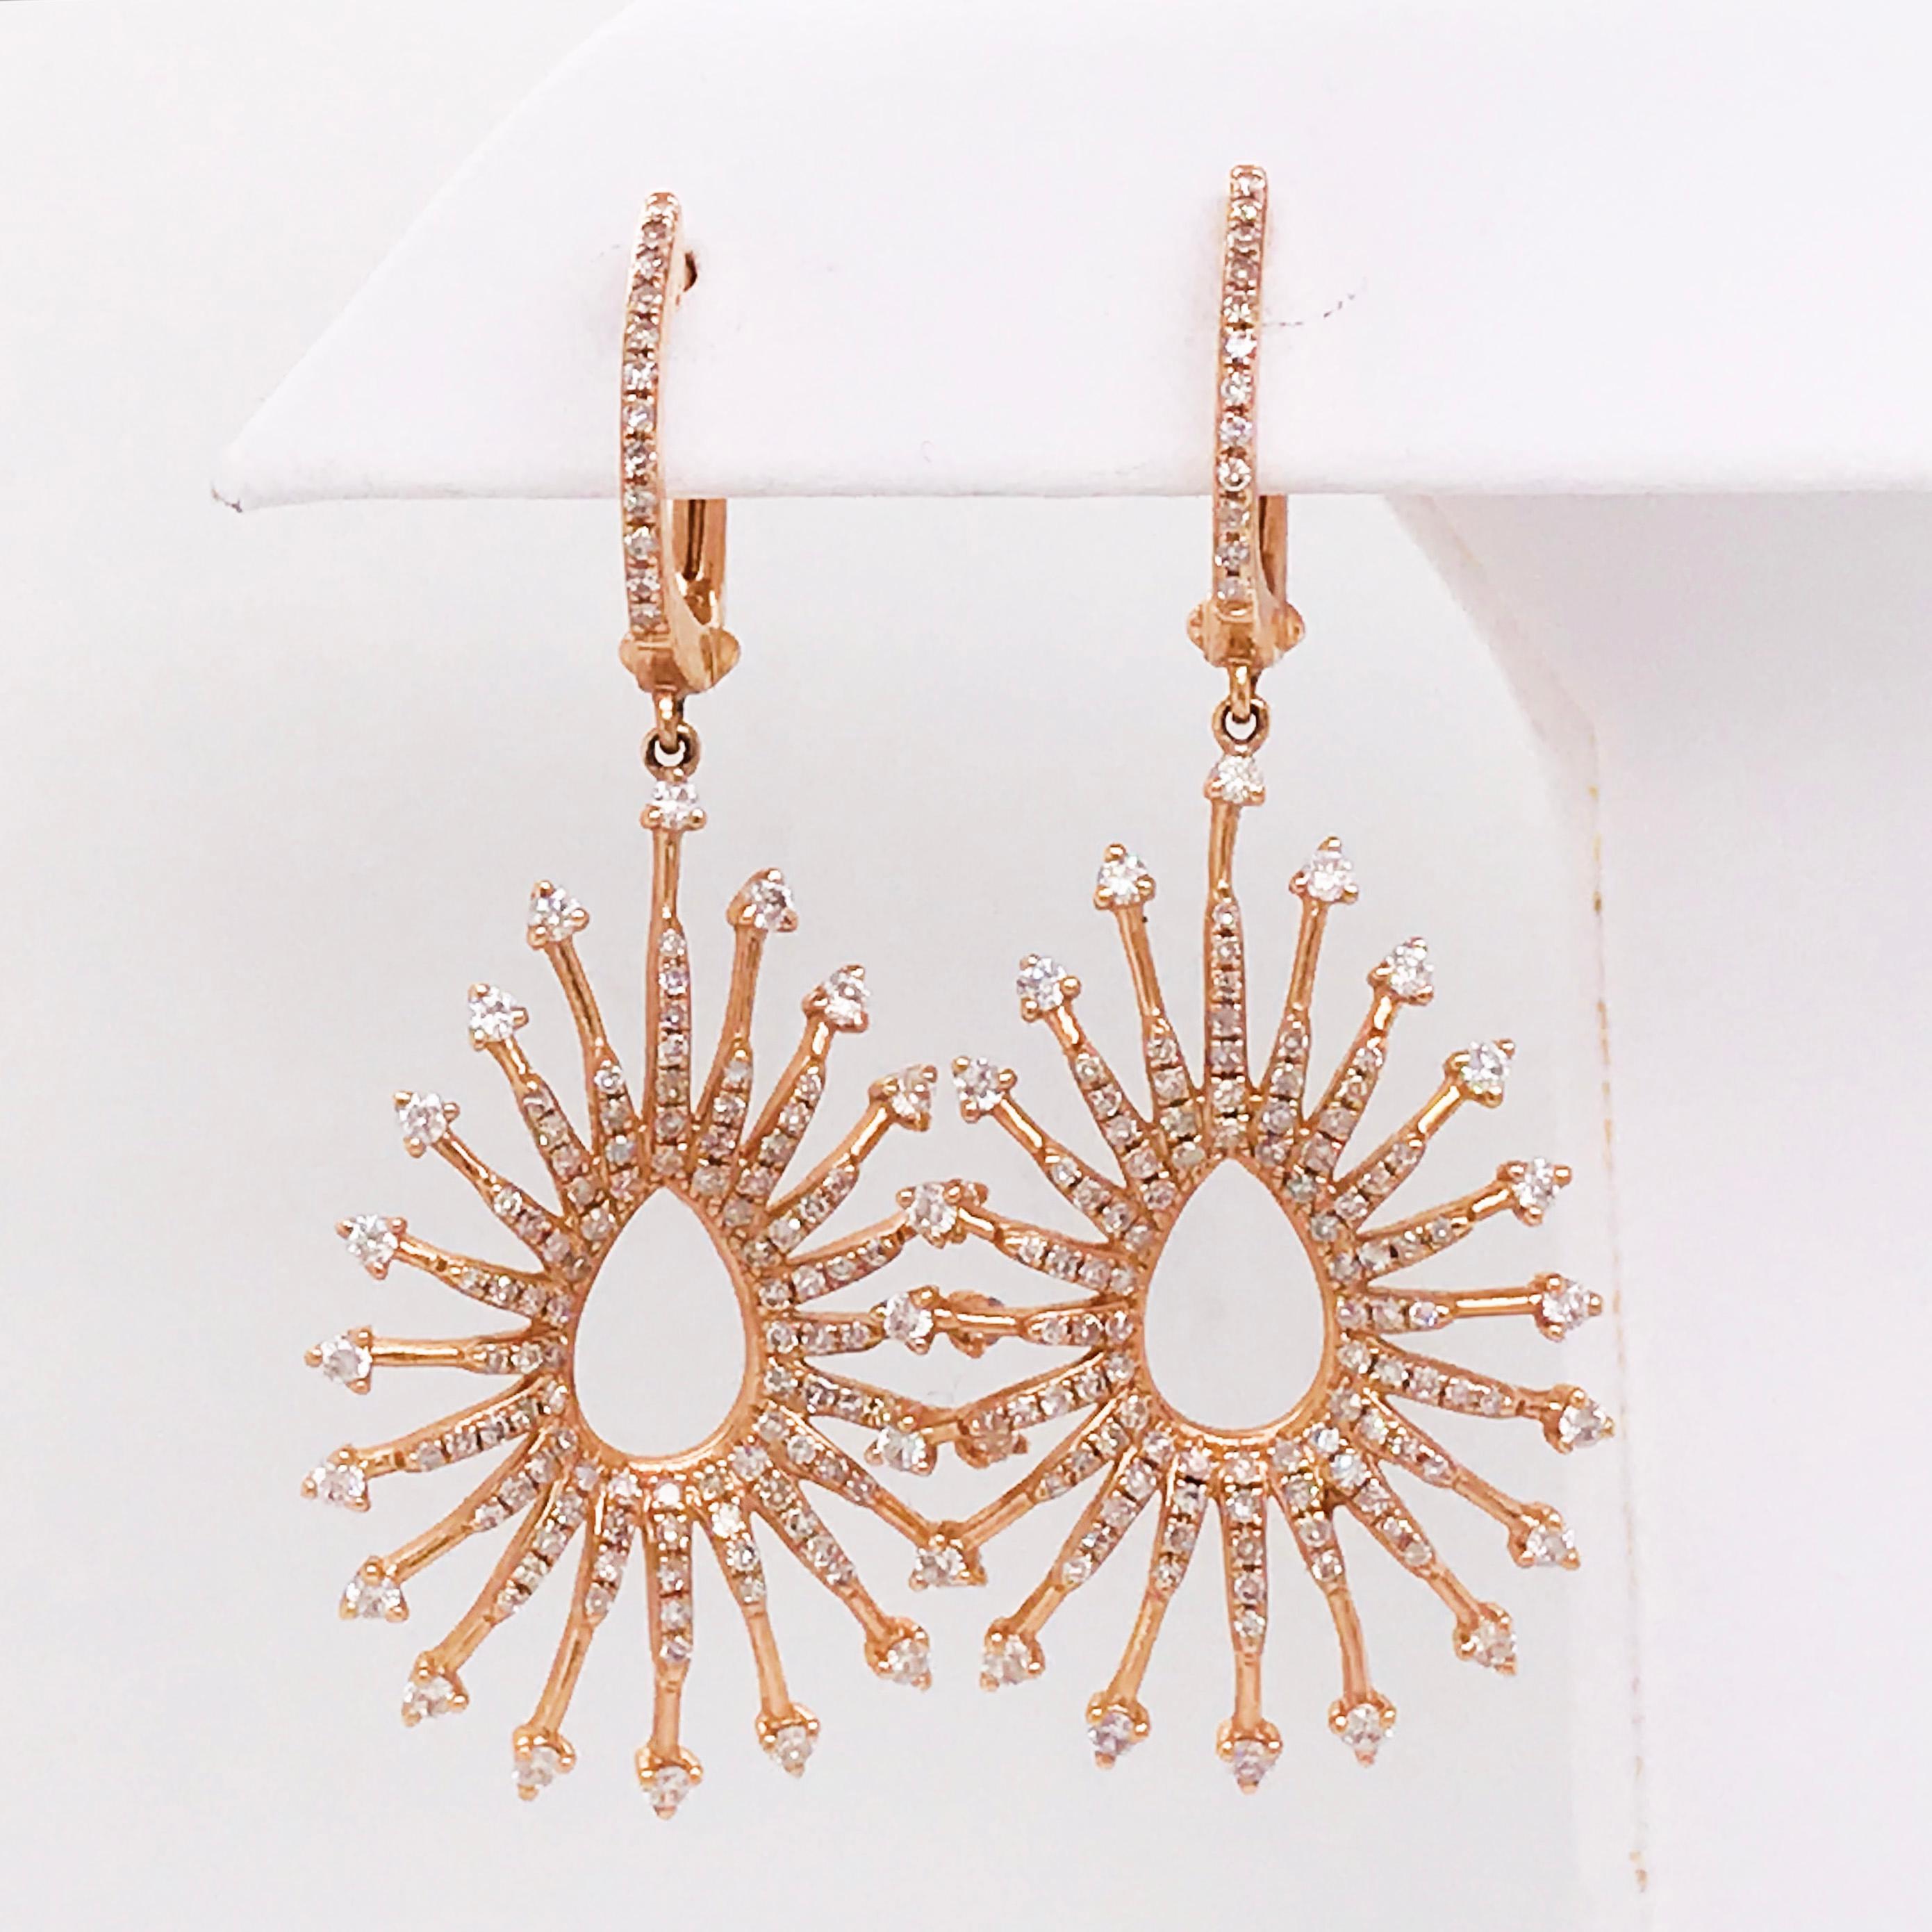 These are one of a kind rose gold dangle earrings with diamonds, perfect for a wedding or any event where you want to feel fabulous! A gorgeous pear shaped starburst is paved with round brilliant diamonds. The unique prong setting gives each of the